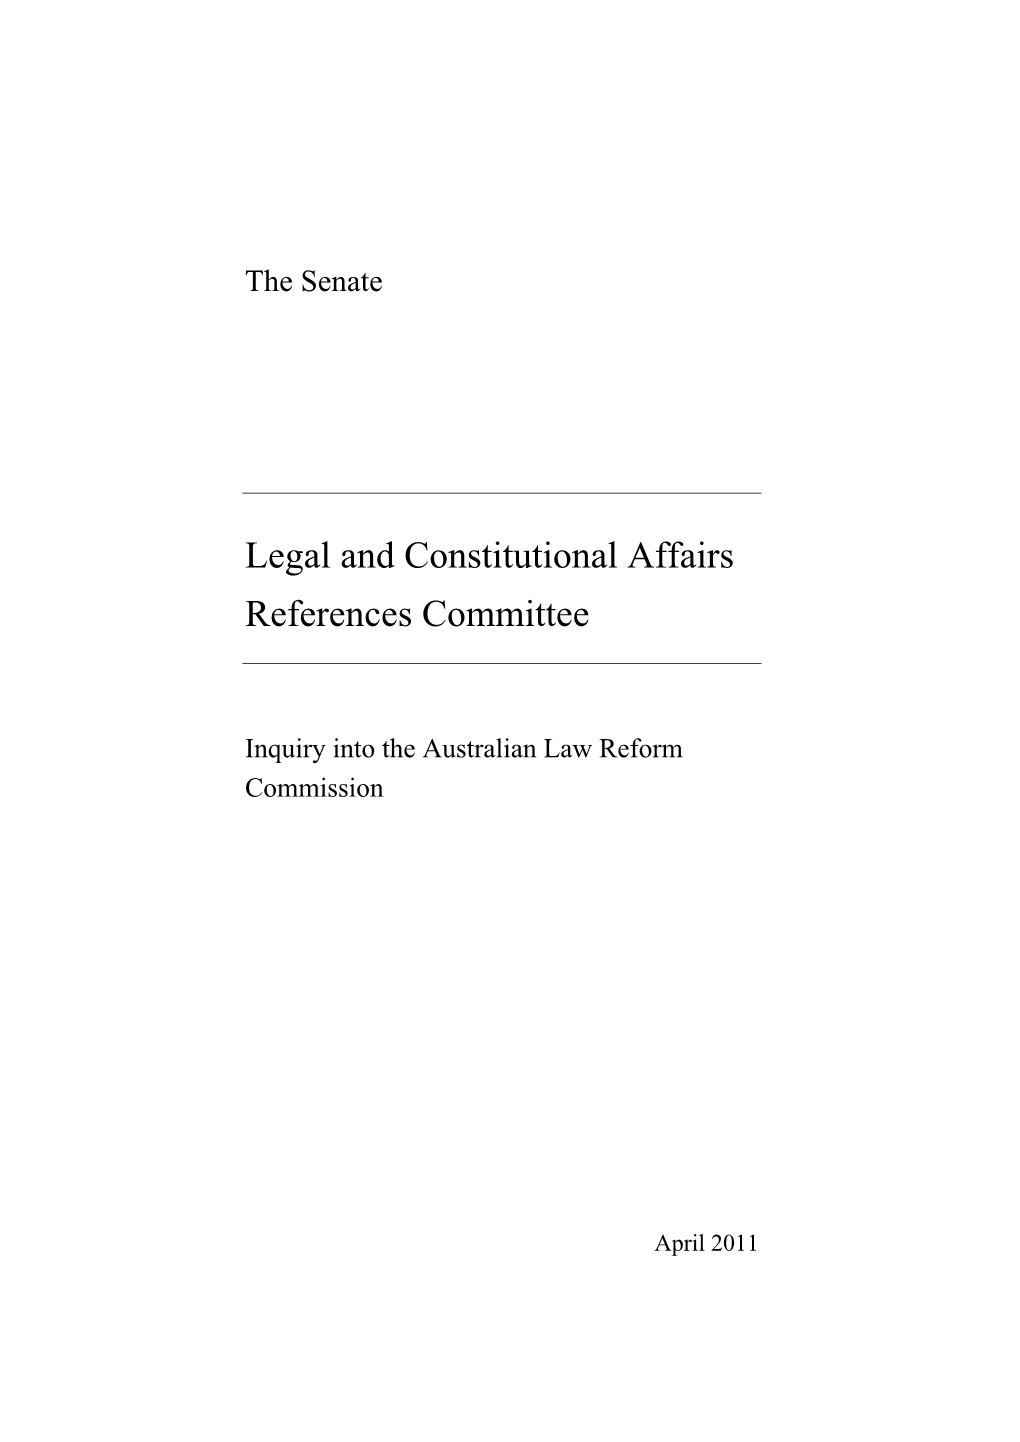 Report: Inquiry Into the Australian Law Reform Commission